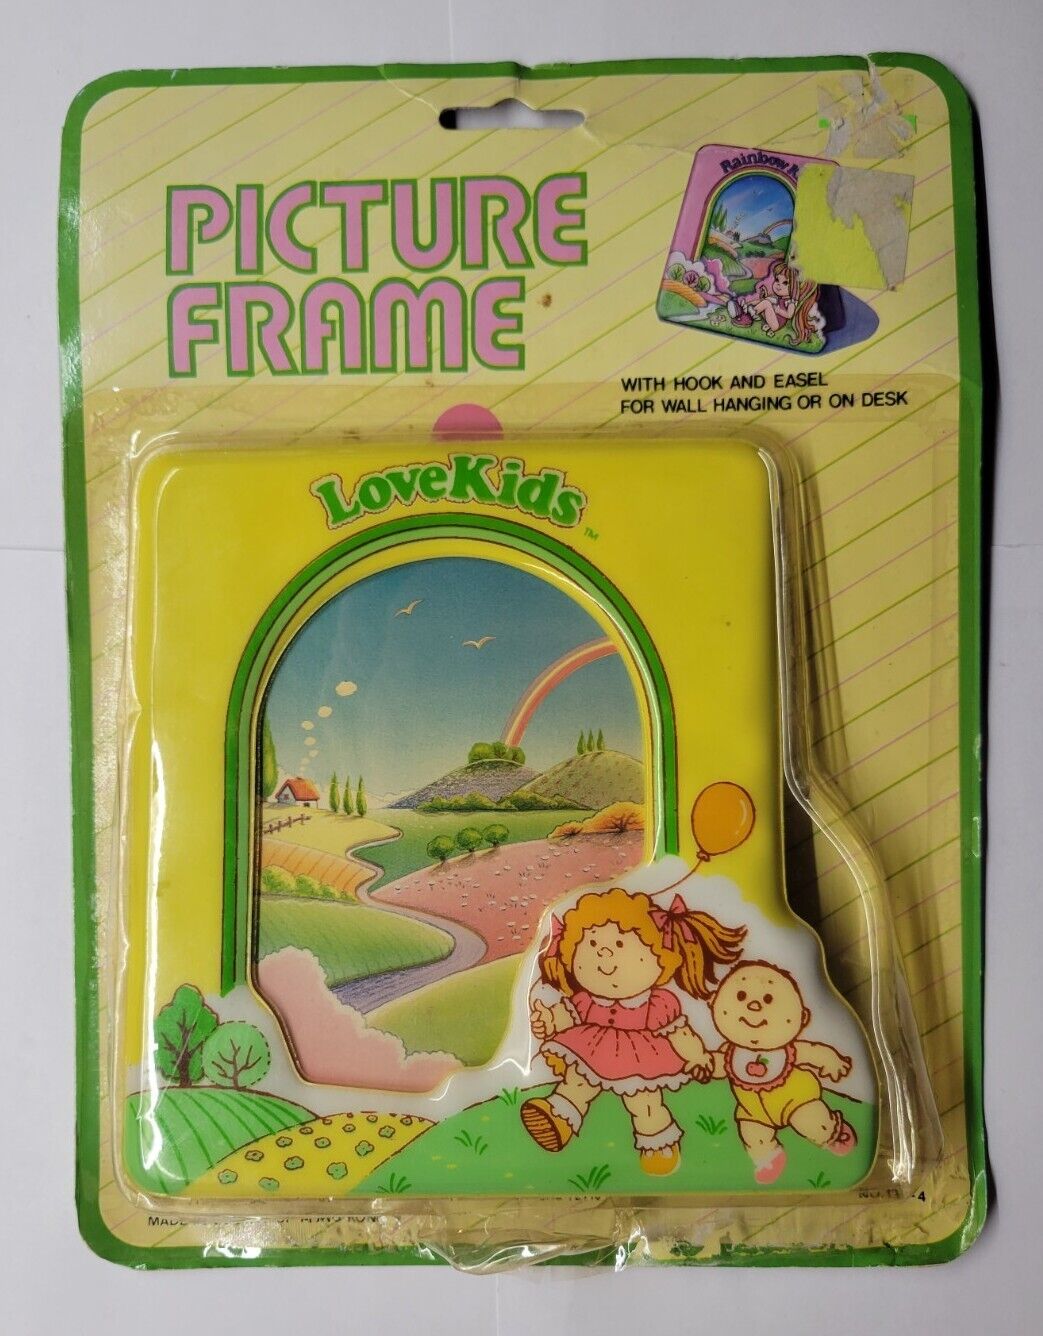 Vintage Late 80s Or Early 90s LoveKids Picture Frame Marketed By Walmart